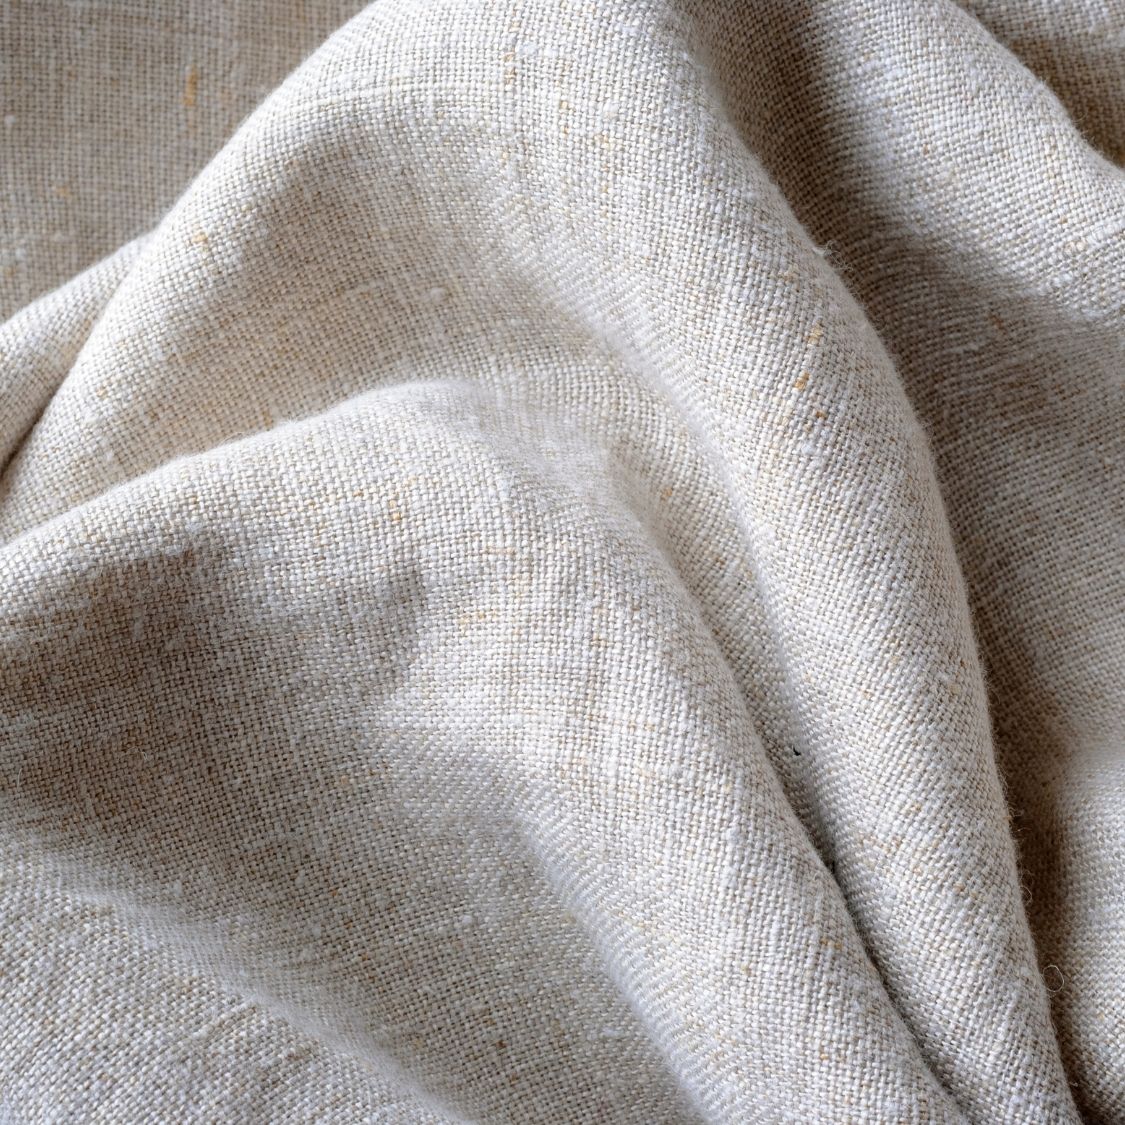 4 Ways Linen Upholstery Fabric Makes Life More Comfortable